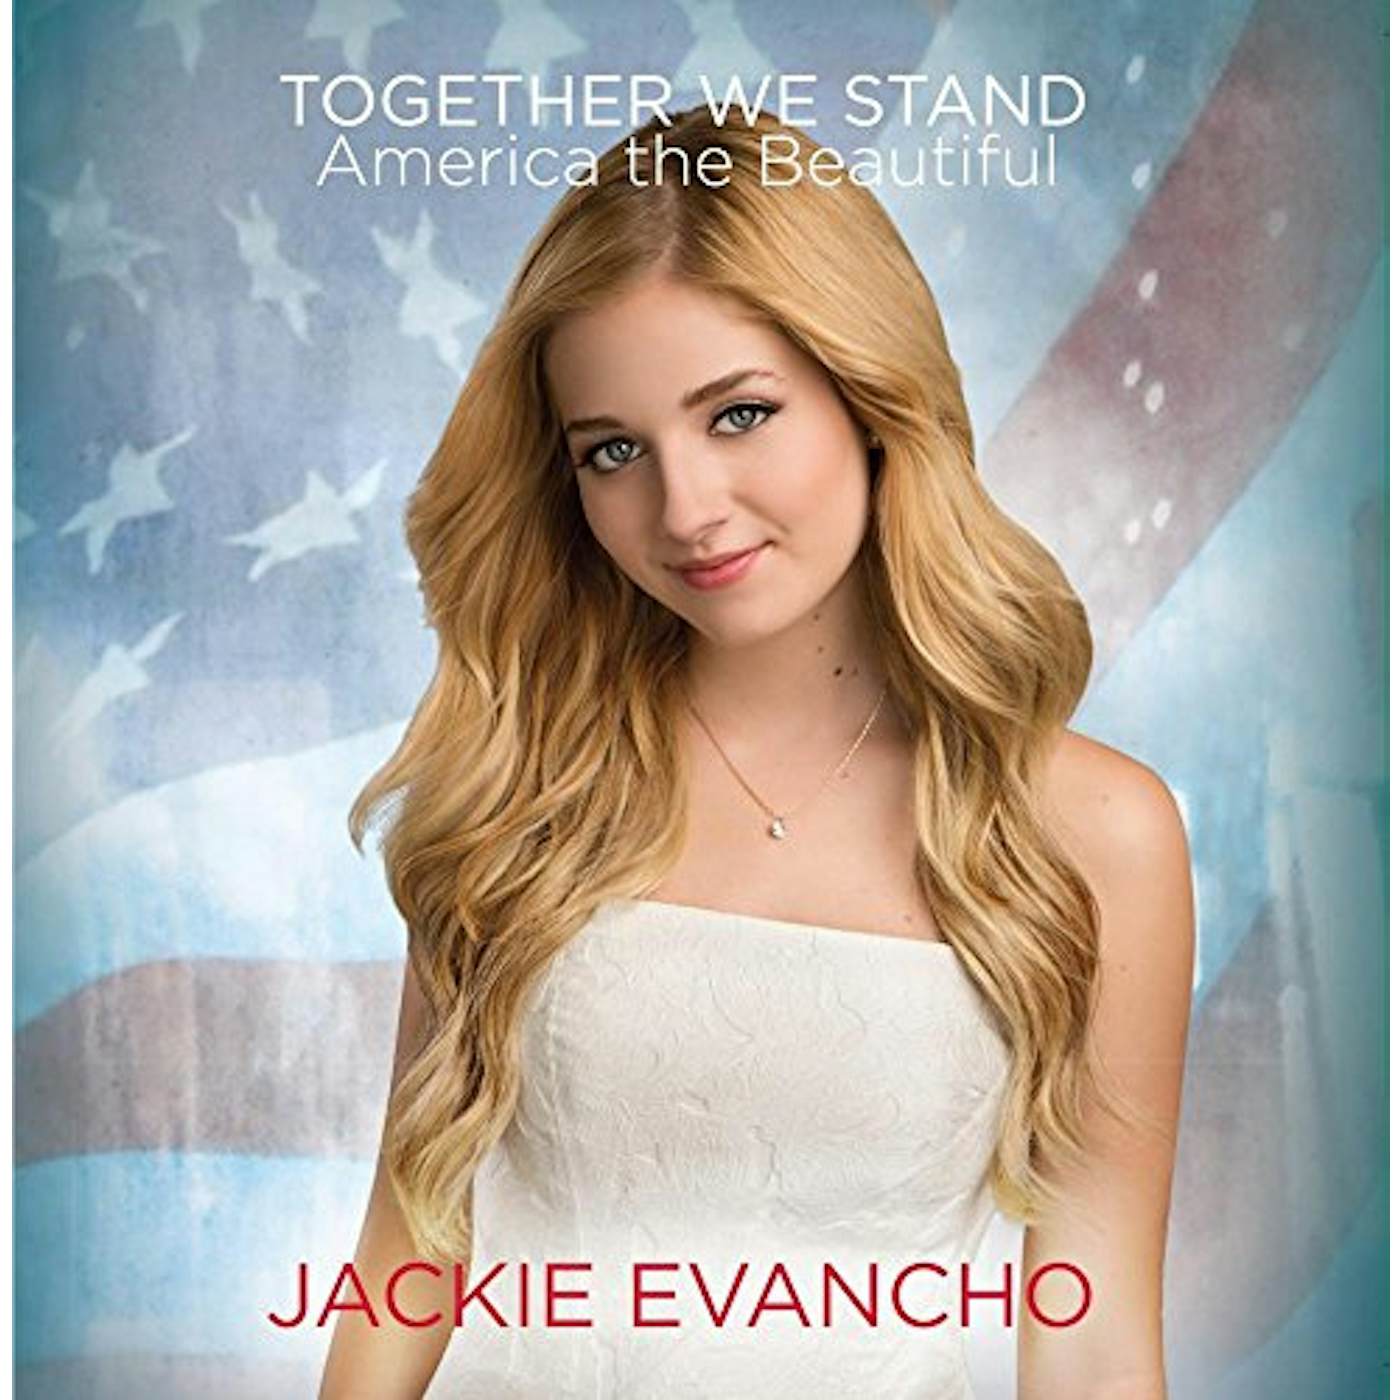 Jackie Evancho TOGETHER WE STAND - AMERICA THE BEAUTIFUL CD